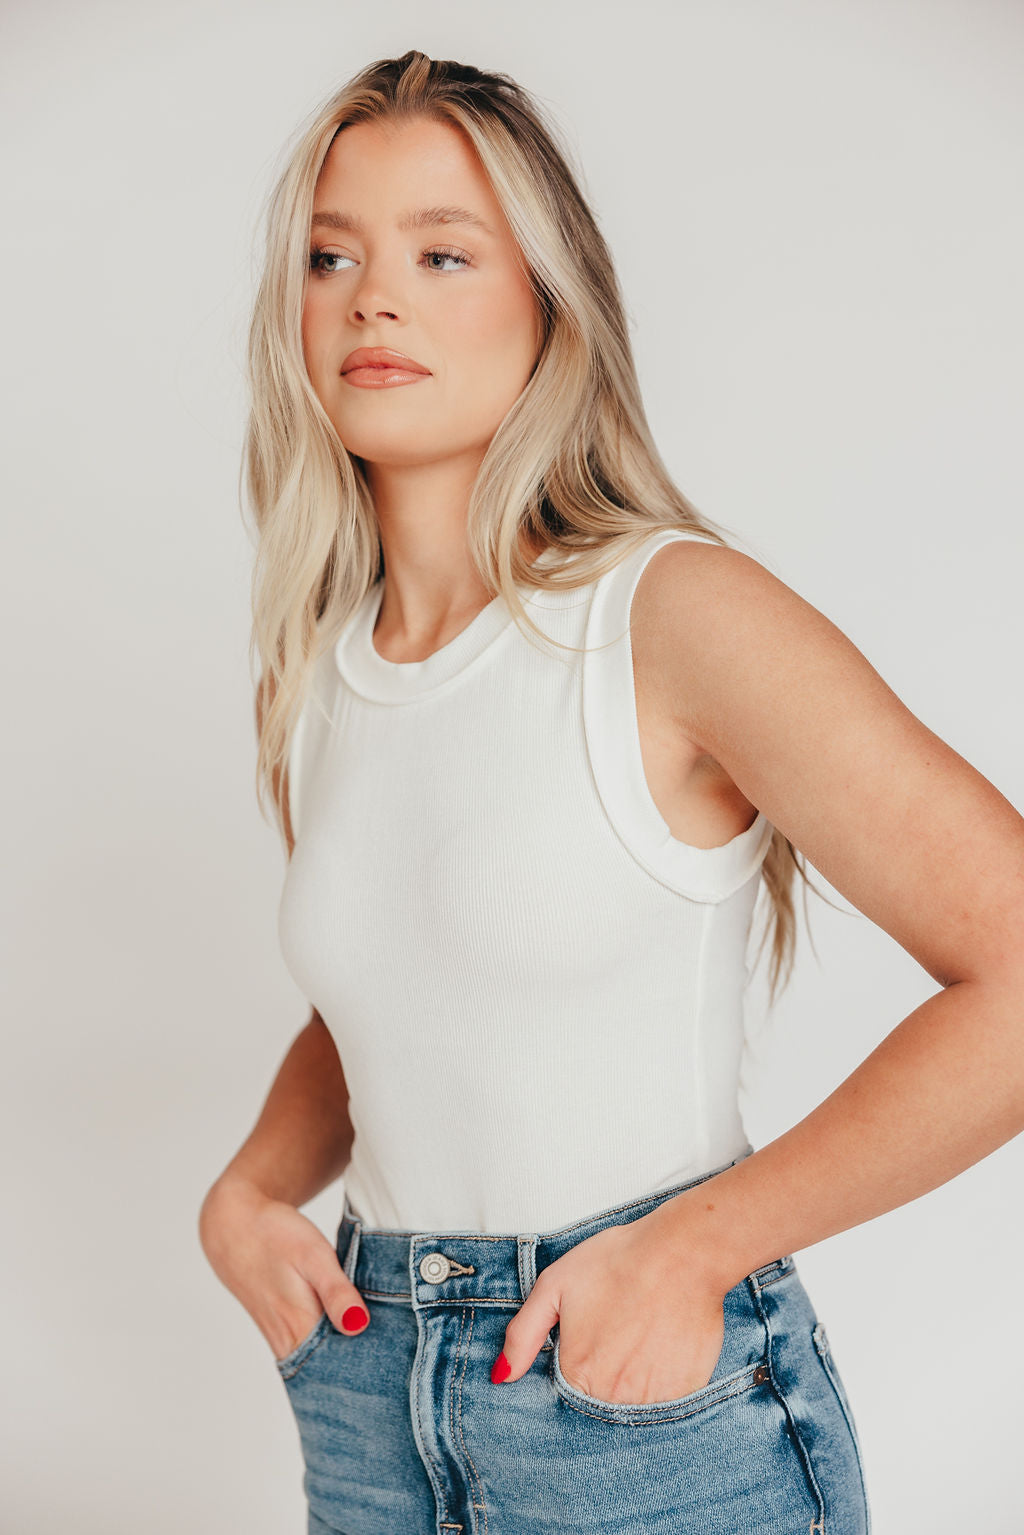 The Junie Top in White